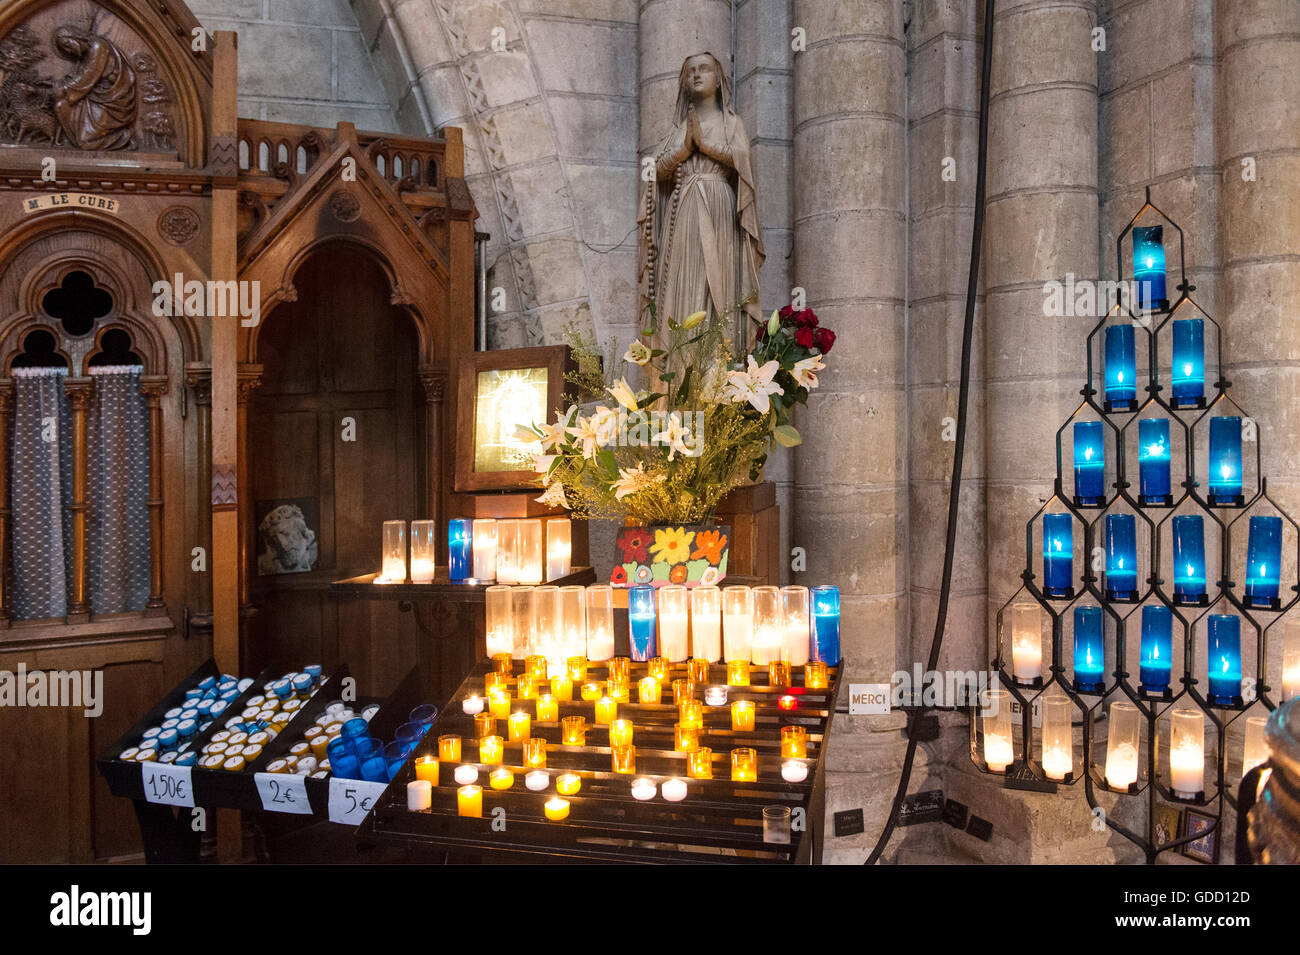 Europe, France, Maine et Loire, Angers, Saint Maurice cathedral Stock Photo